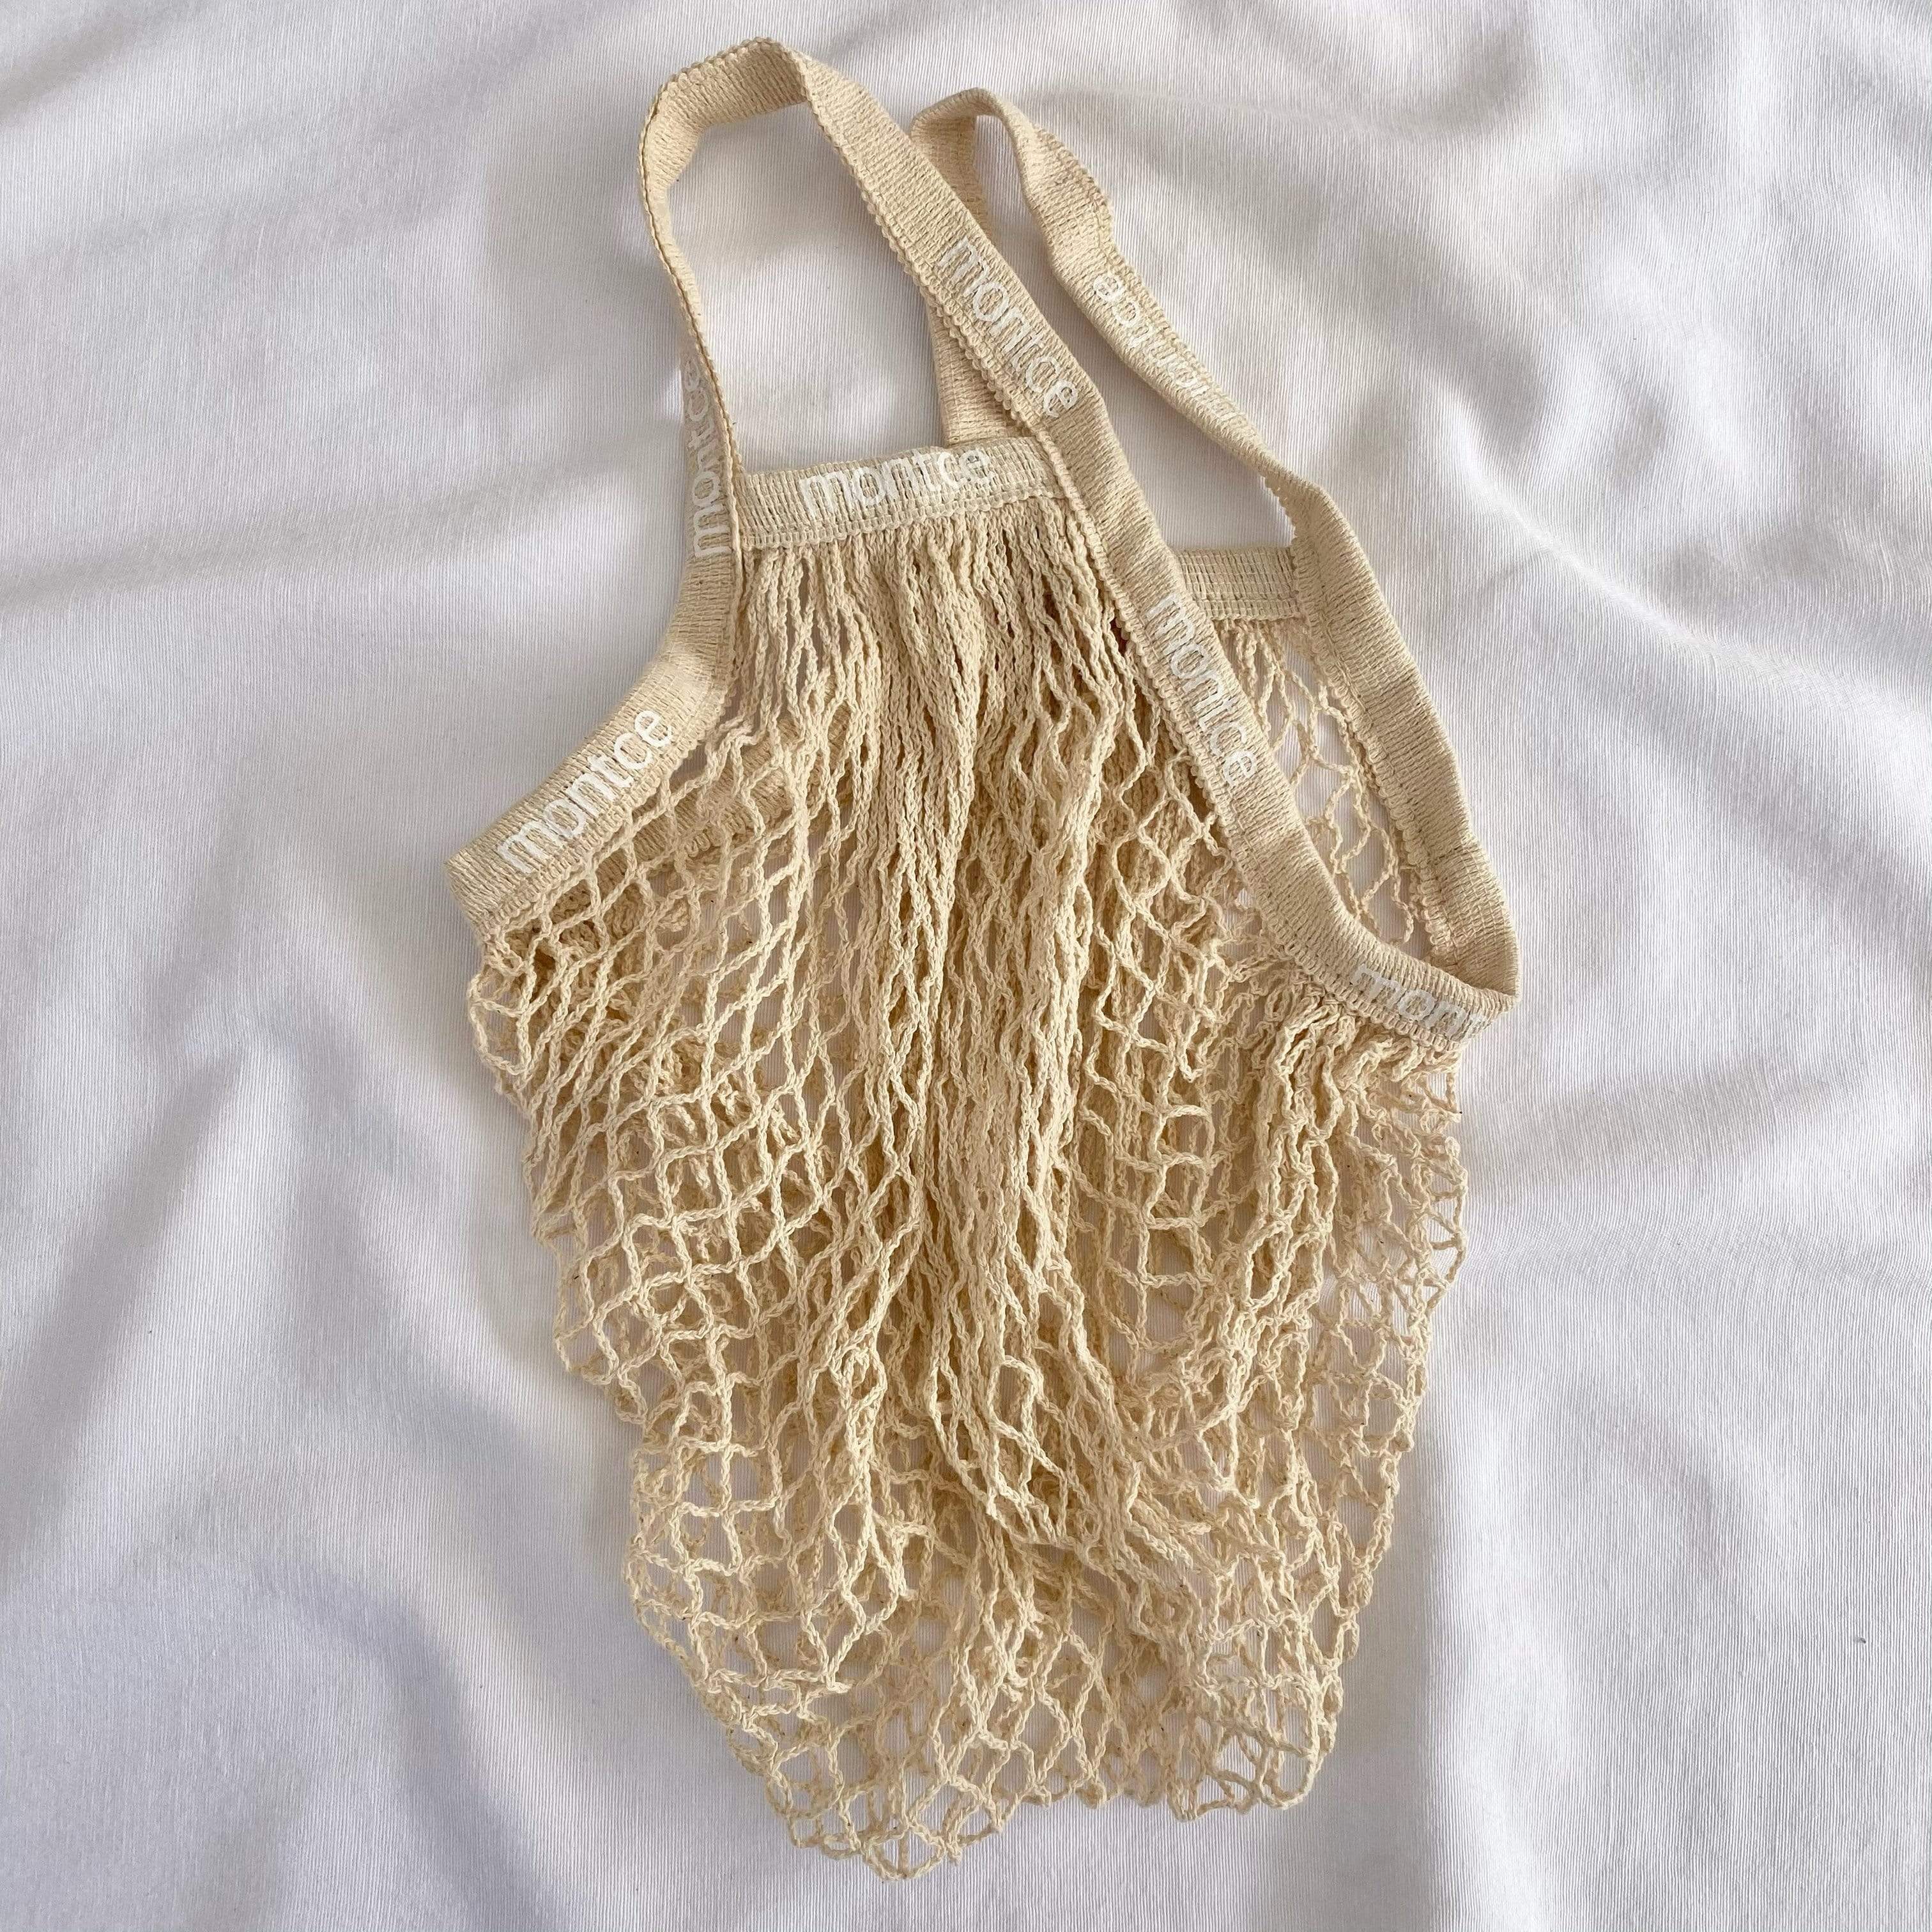 Cotton Net Backpack